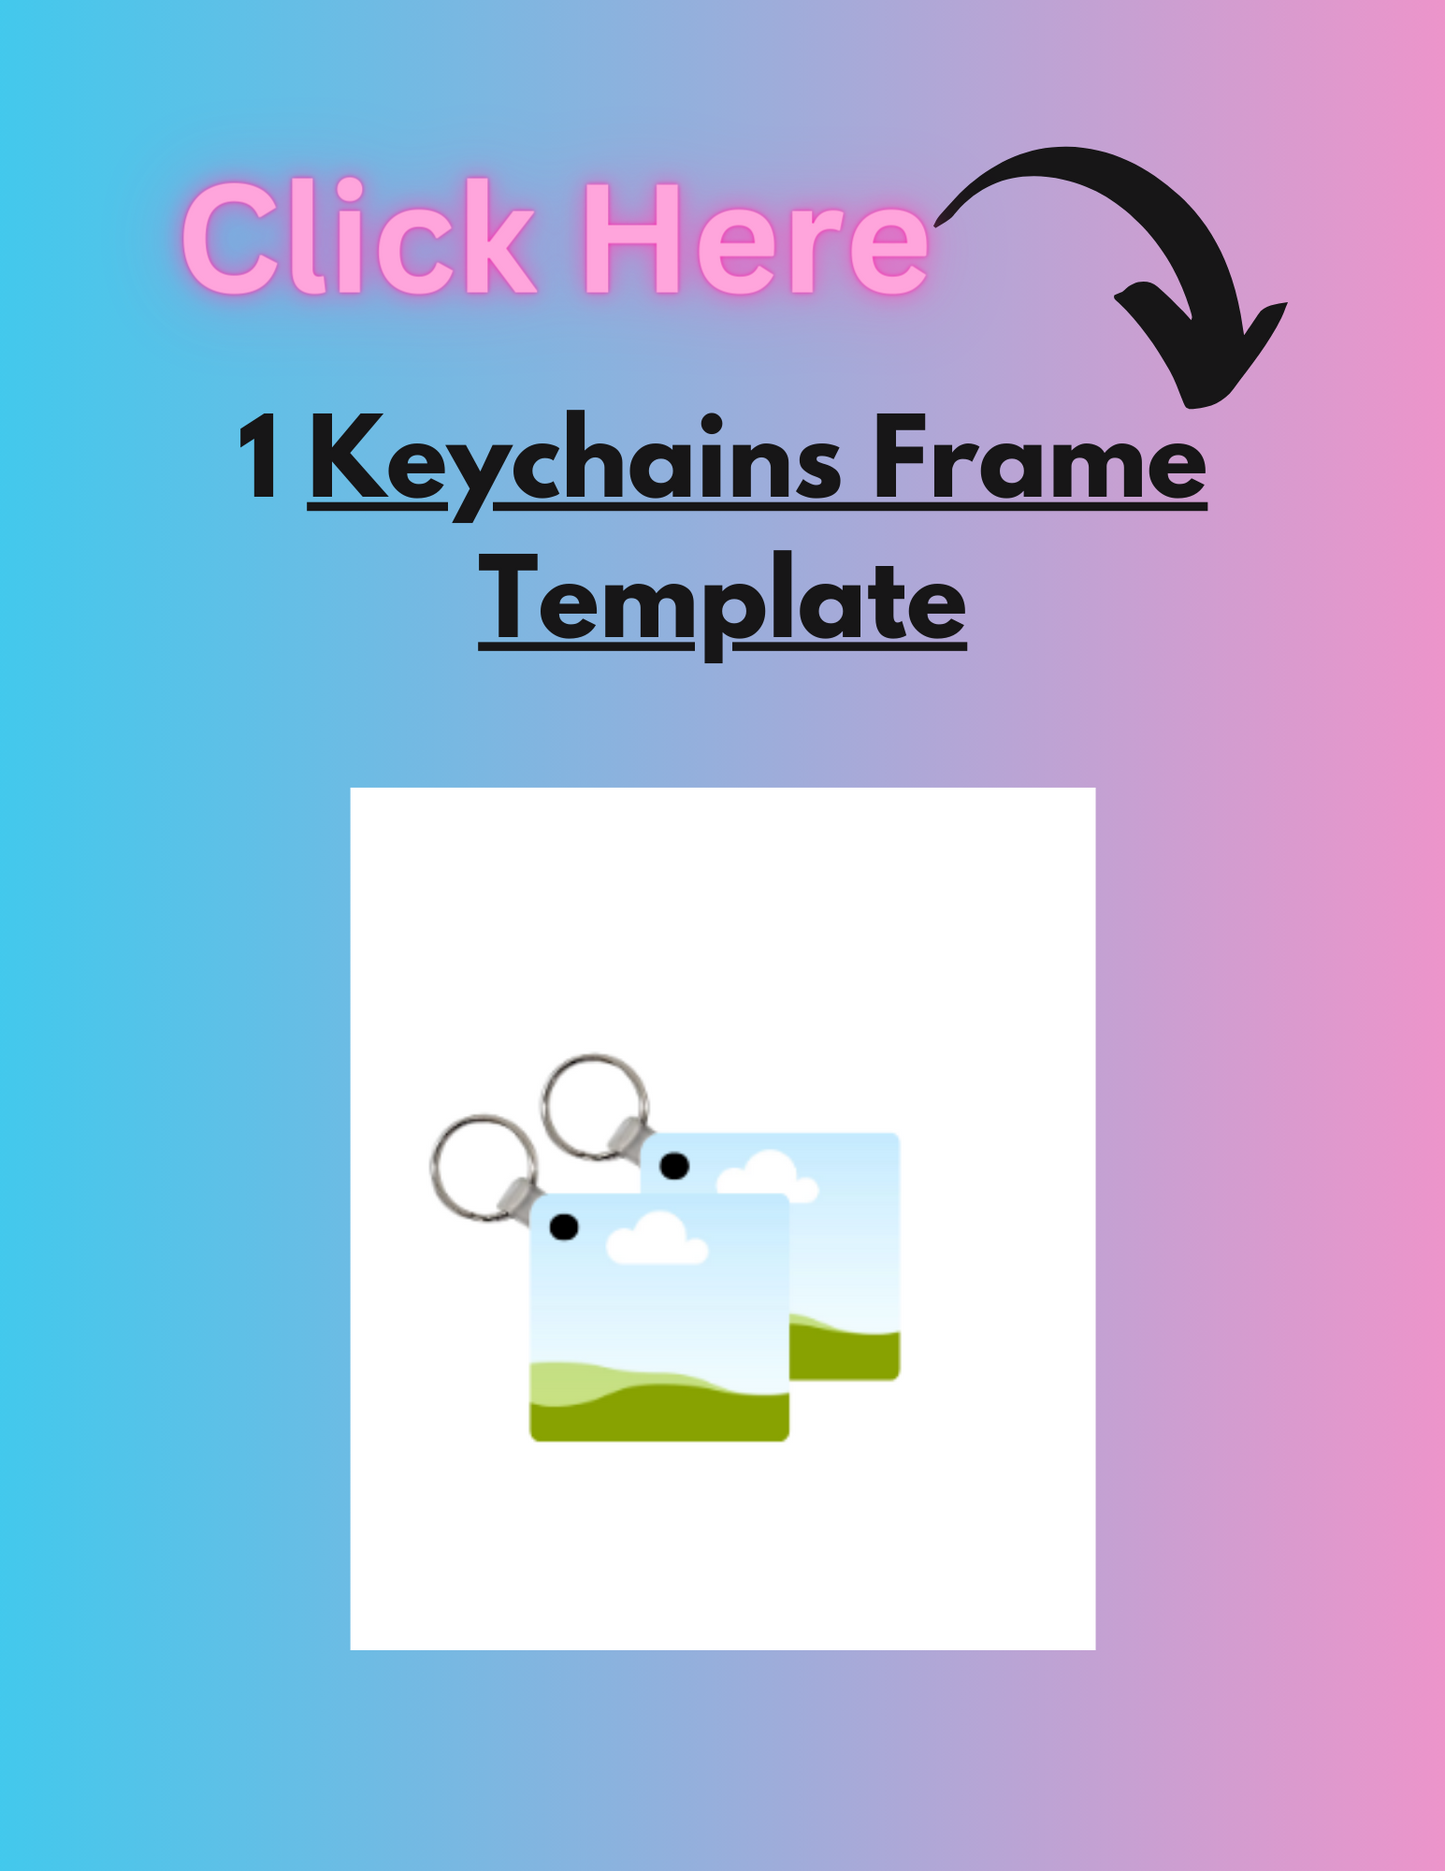 Grad PLR Templates,PNG files and Canva Frames (with Private Label Rights)